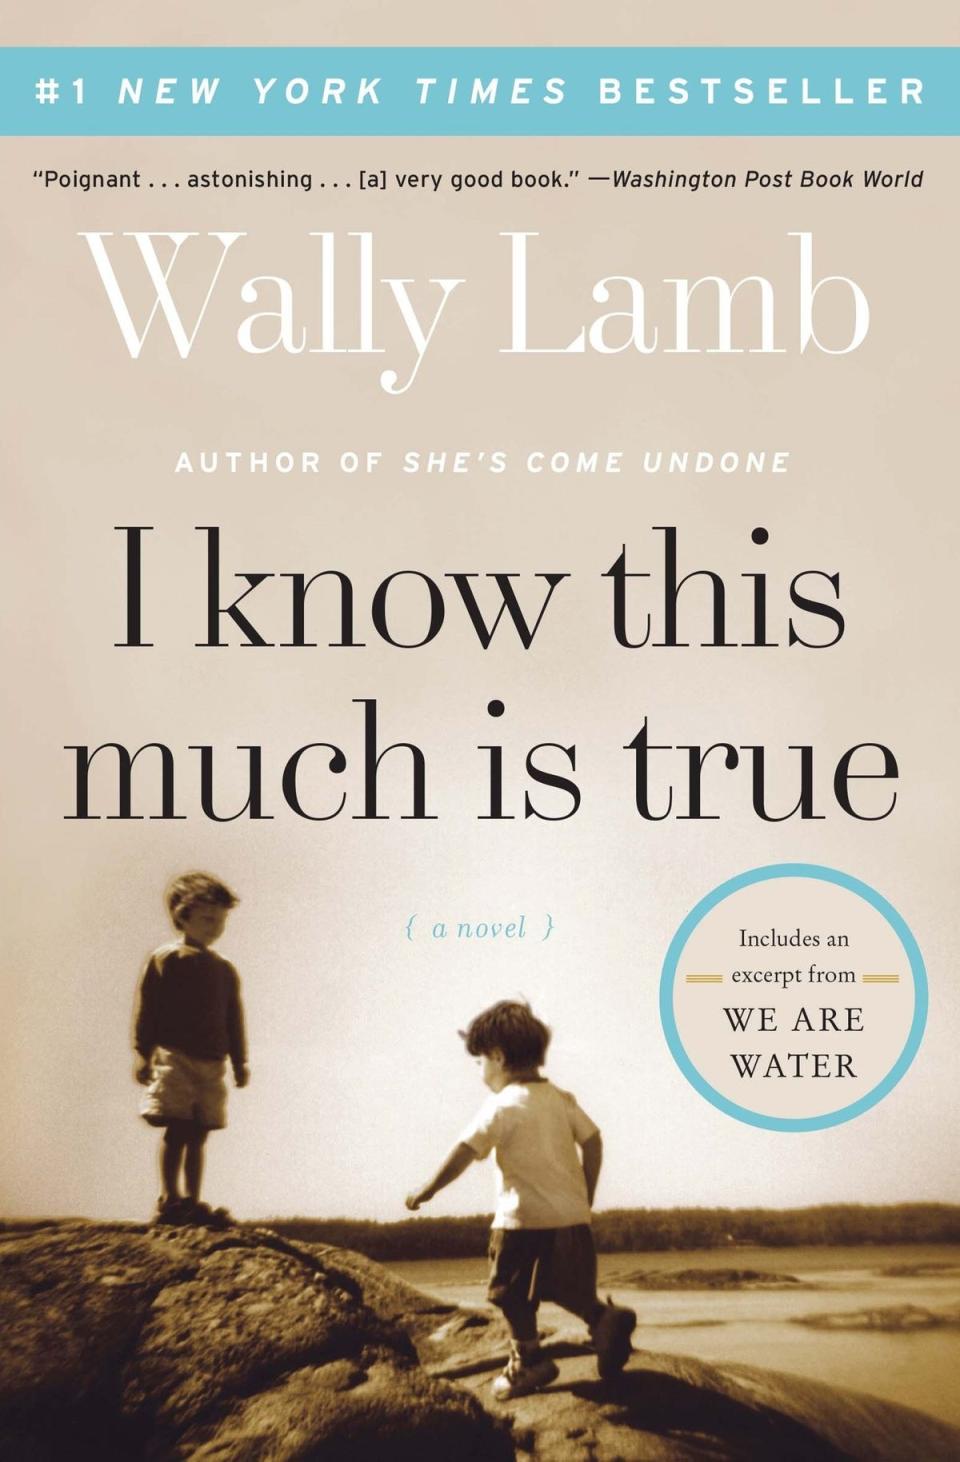 "I Know This Much Is True" by Wally Lamb